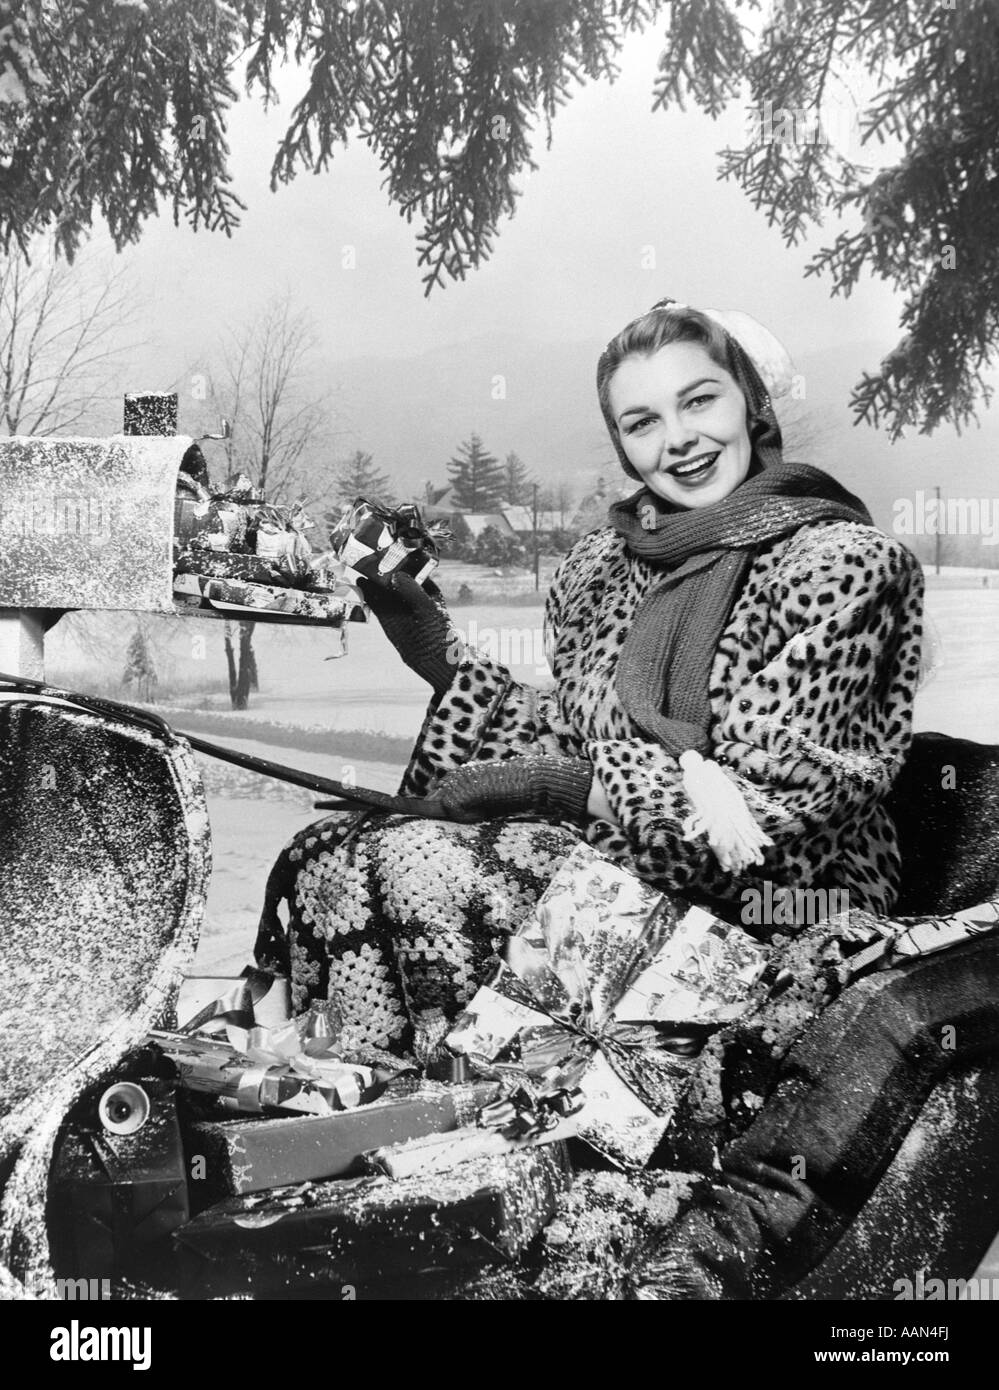 1950s SMILING WOMAN LOOKING AT CAMERA RIDING IN SLEIGH WEARING  LEOPARD SKIN FUR COAT AT MAILBOX WITH PACKAGES Stock Photo